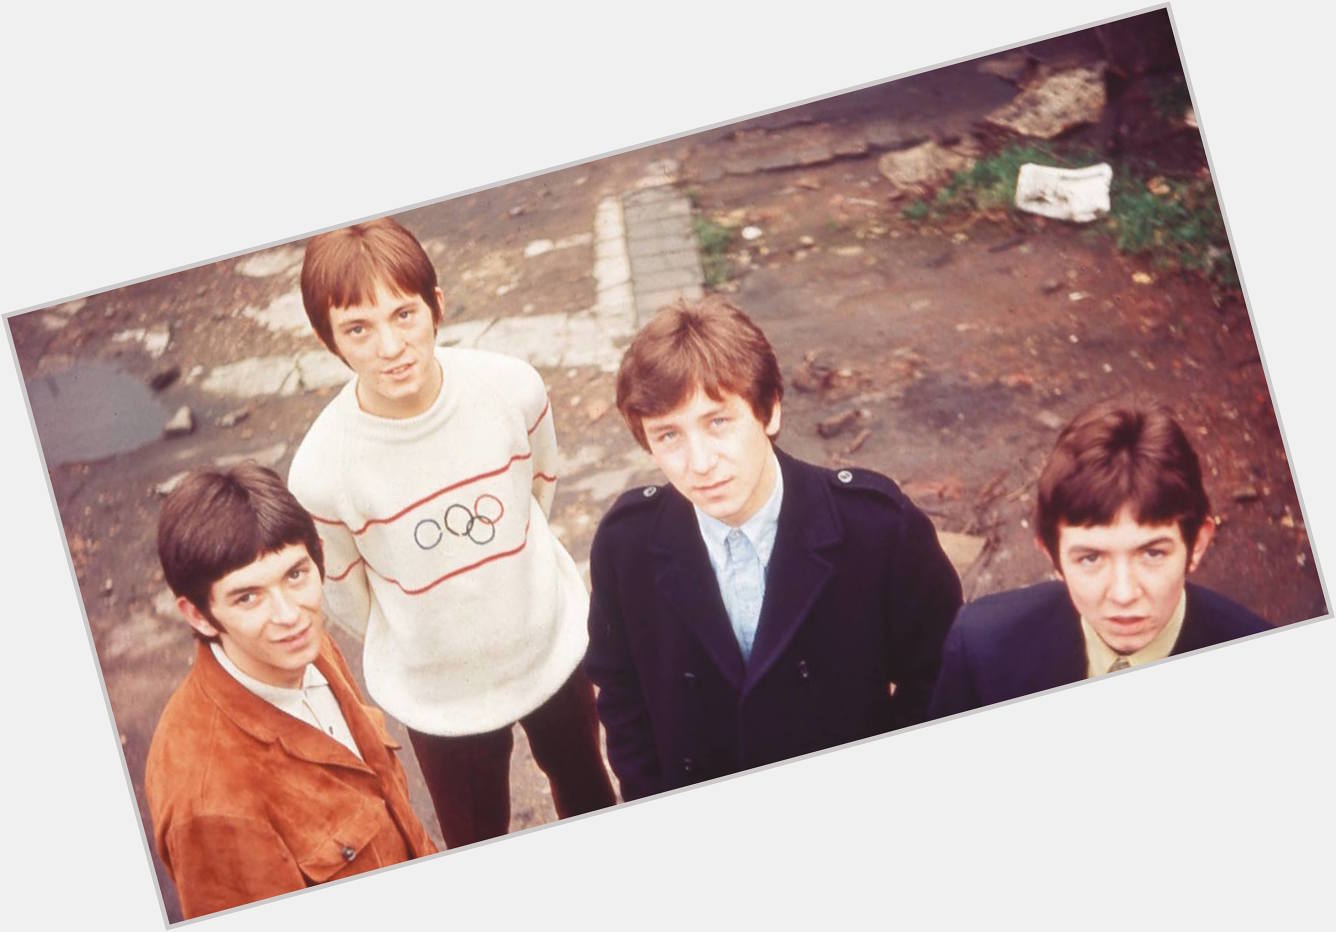 Happy 73rd Birthday to Drummer Kenney Jones!

He\s pictured 2nd from R with Small Faces:  